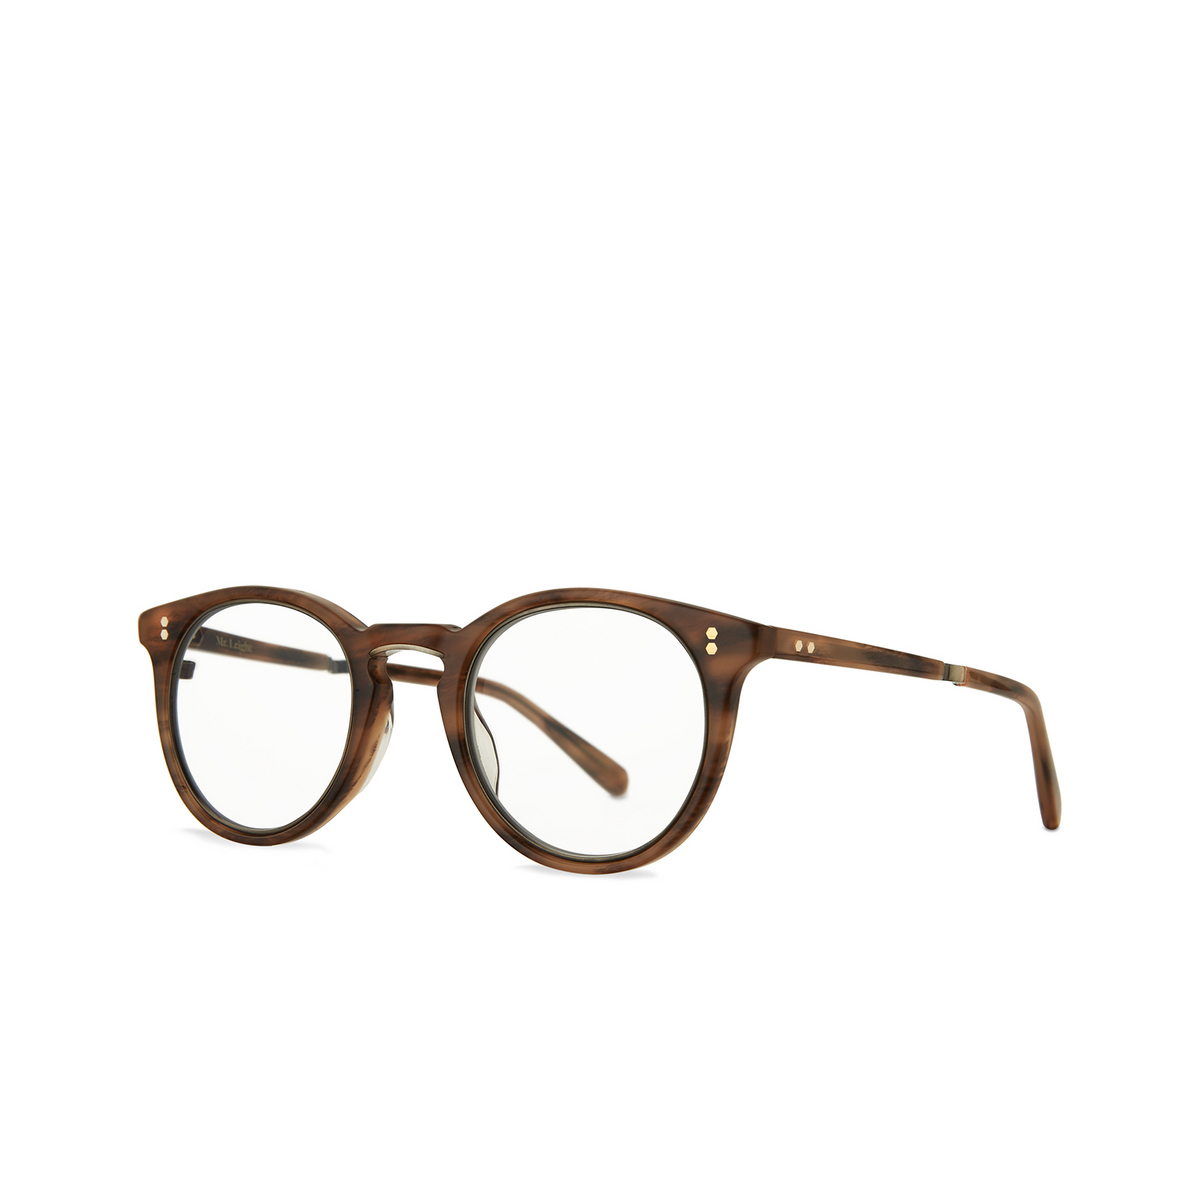 Mr. Leight® Round Eyeglasses: Crosby C color Patchouli - Antique Gold Pat-atg - three-quarters view.